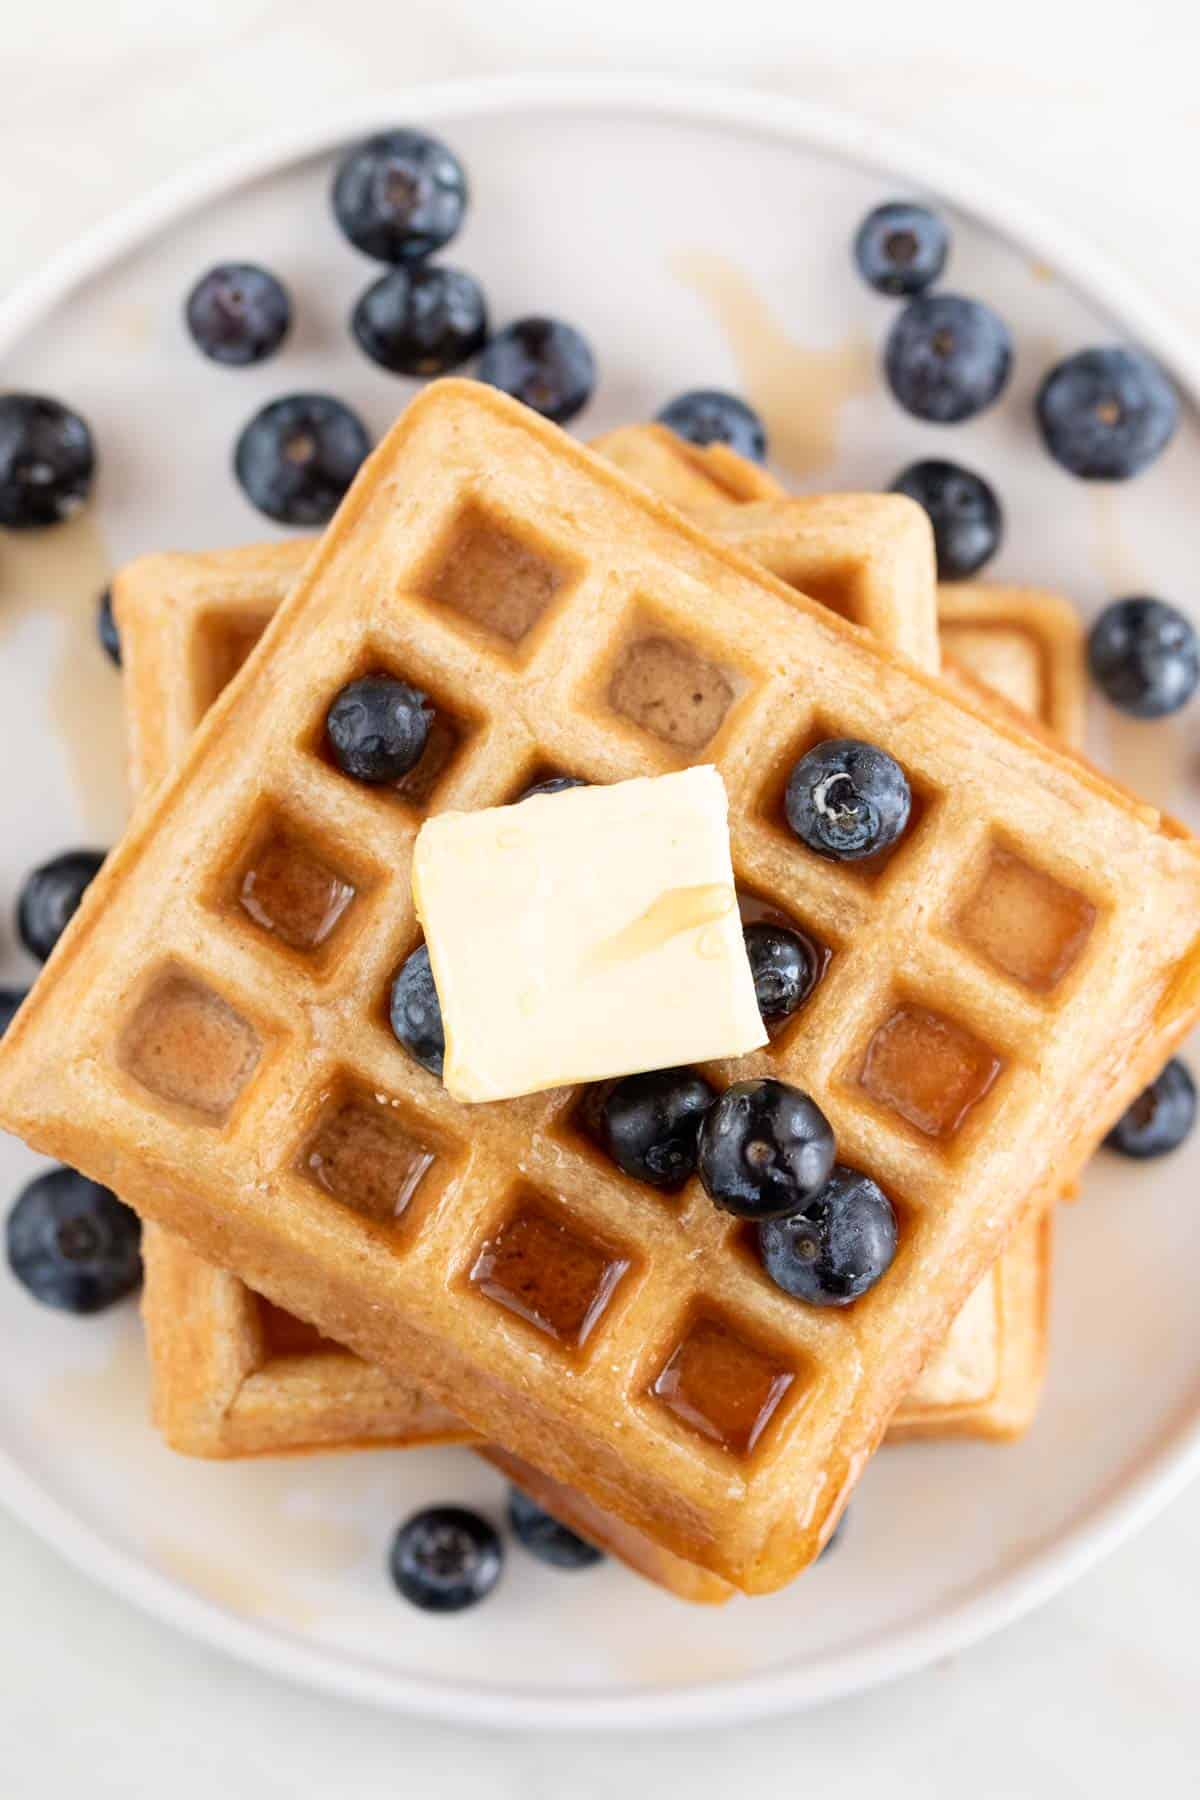 A tower of vegan waffles topped with blueberries, vegan butter, and maple syrup.